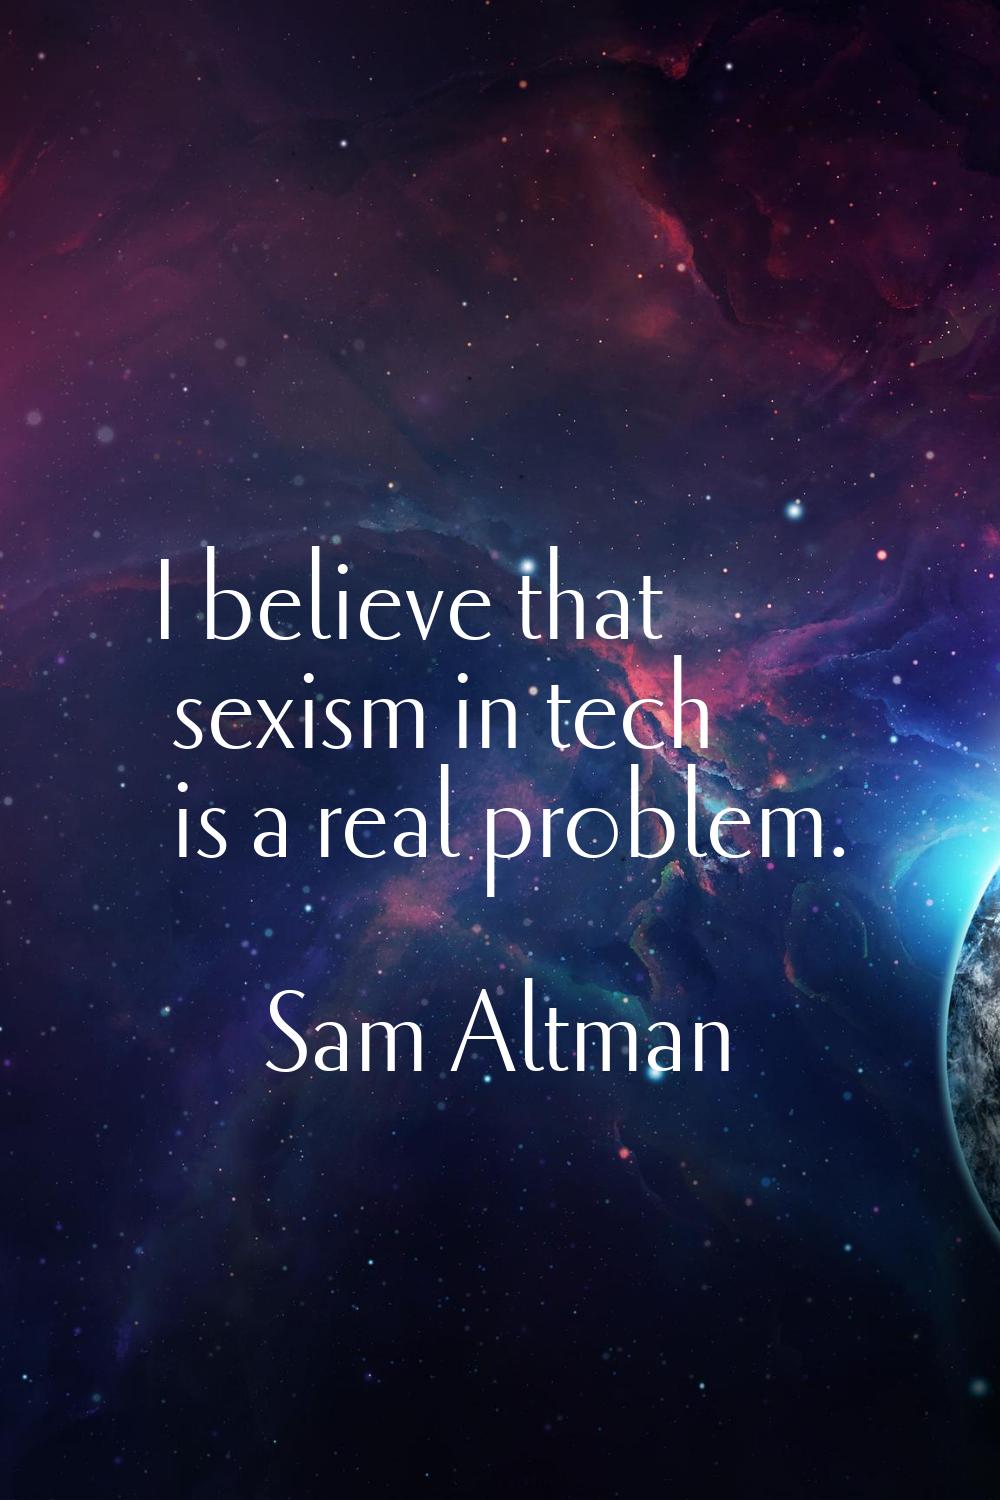 I believe that sexism in tech is a real problem.